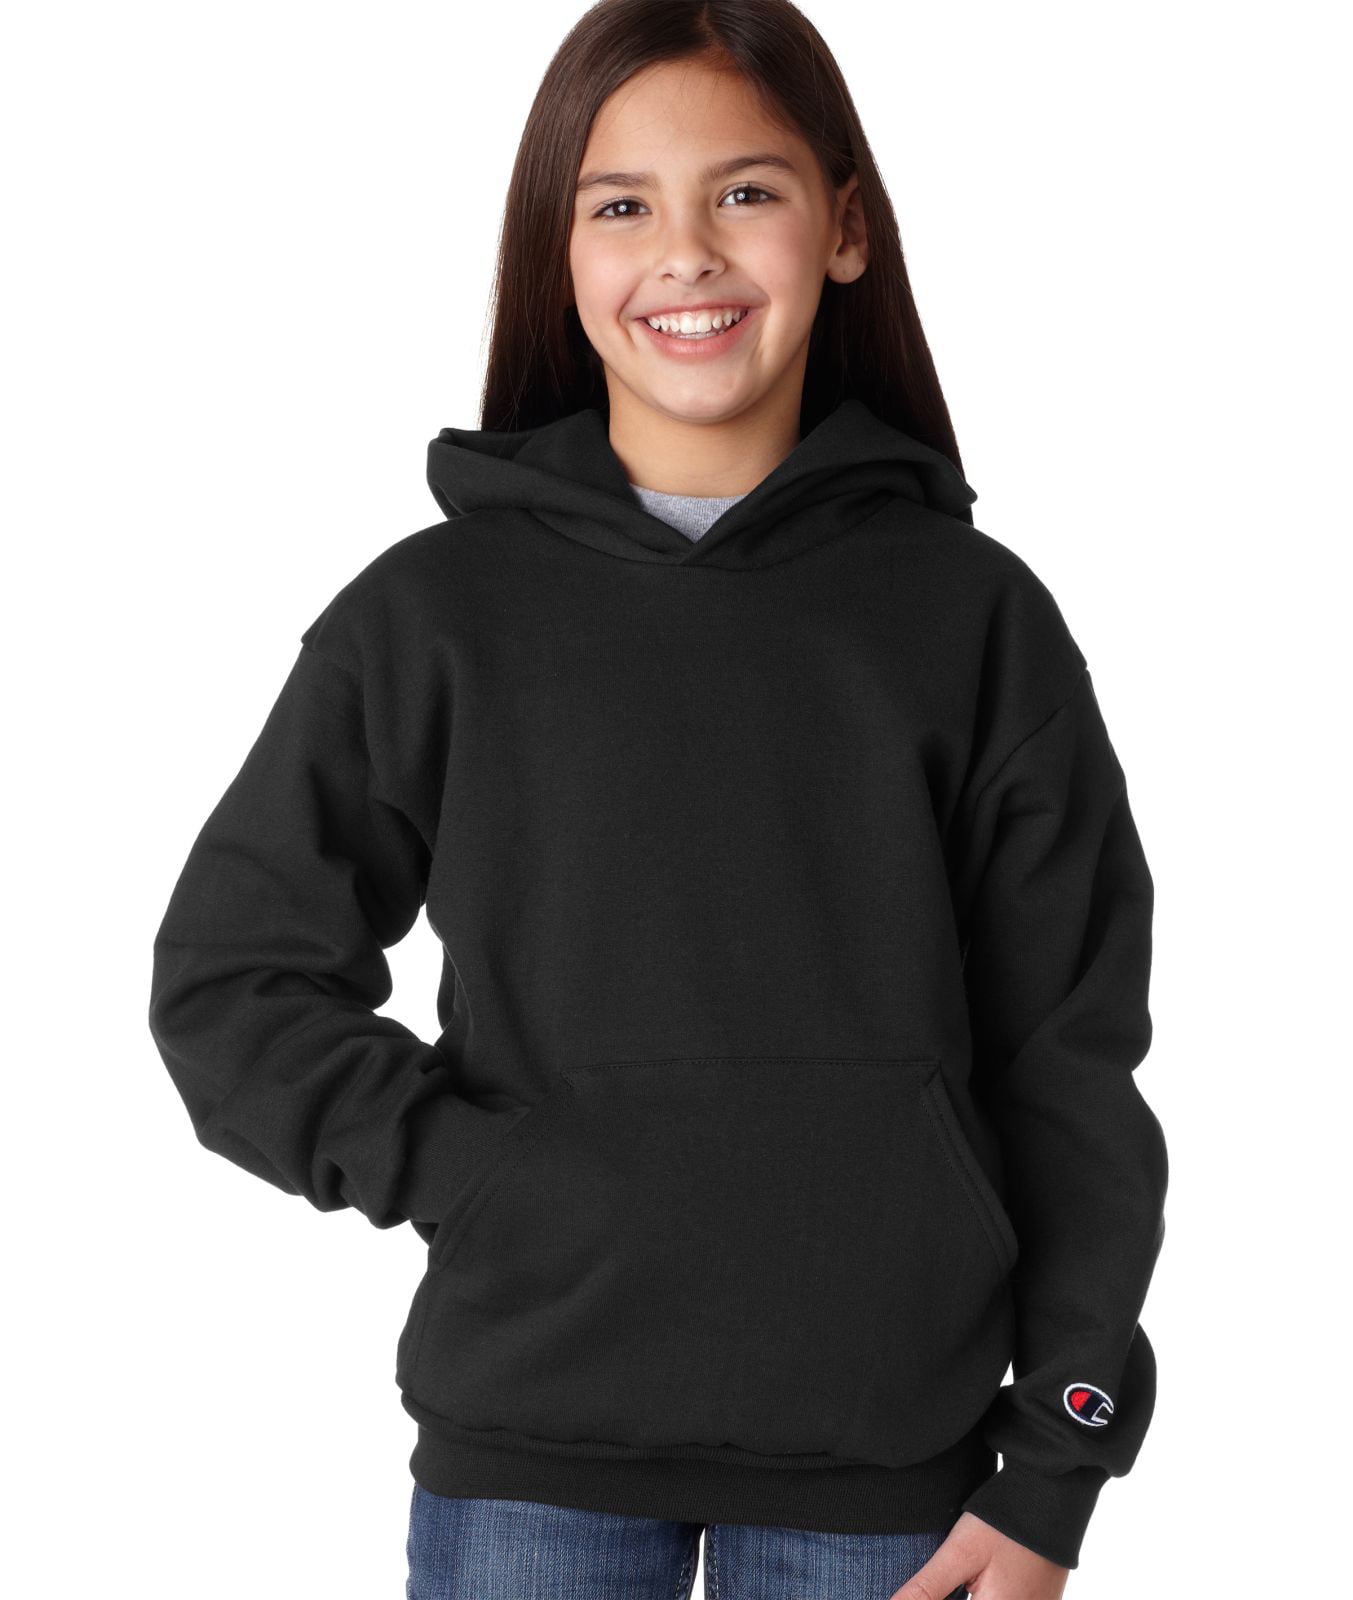 champion double dry action fleece pullover hoodie